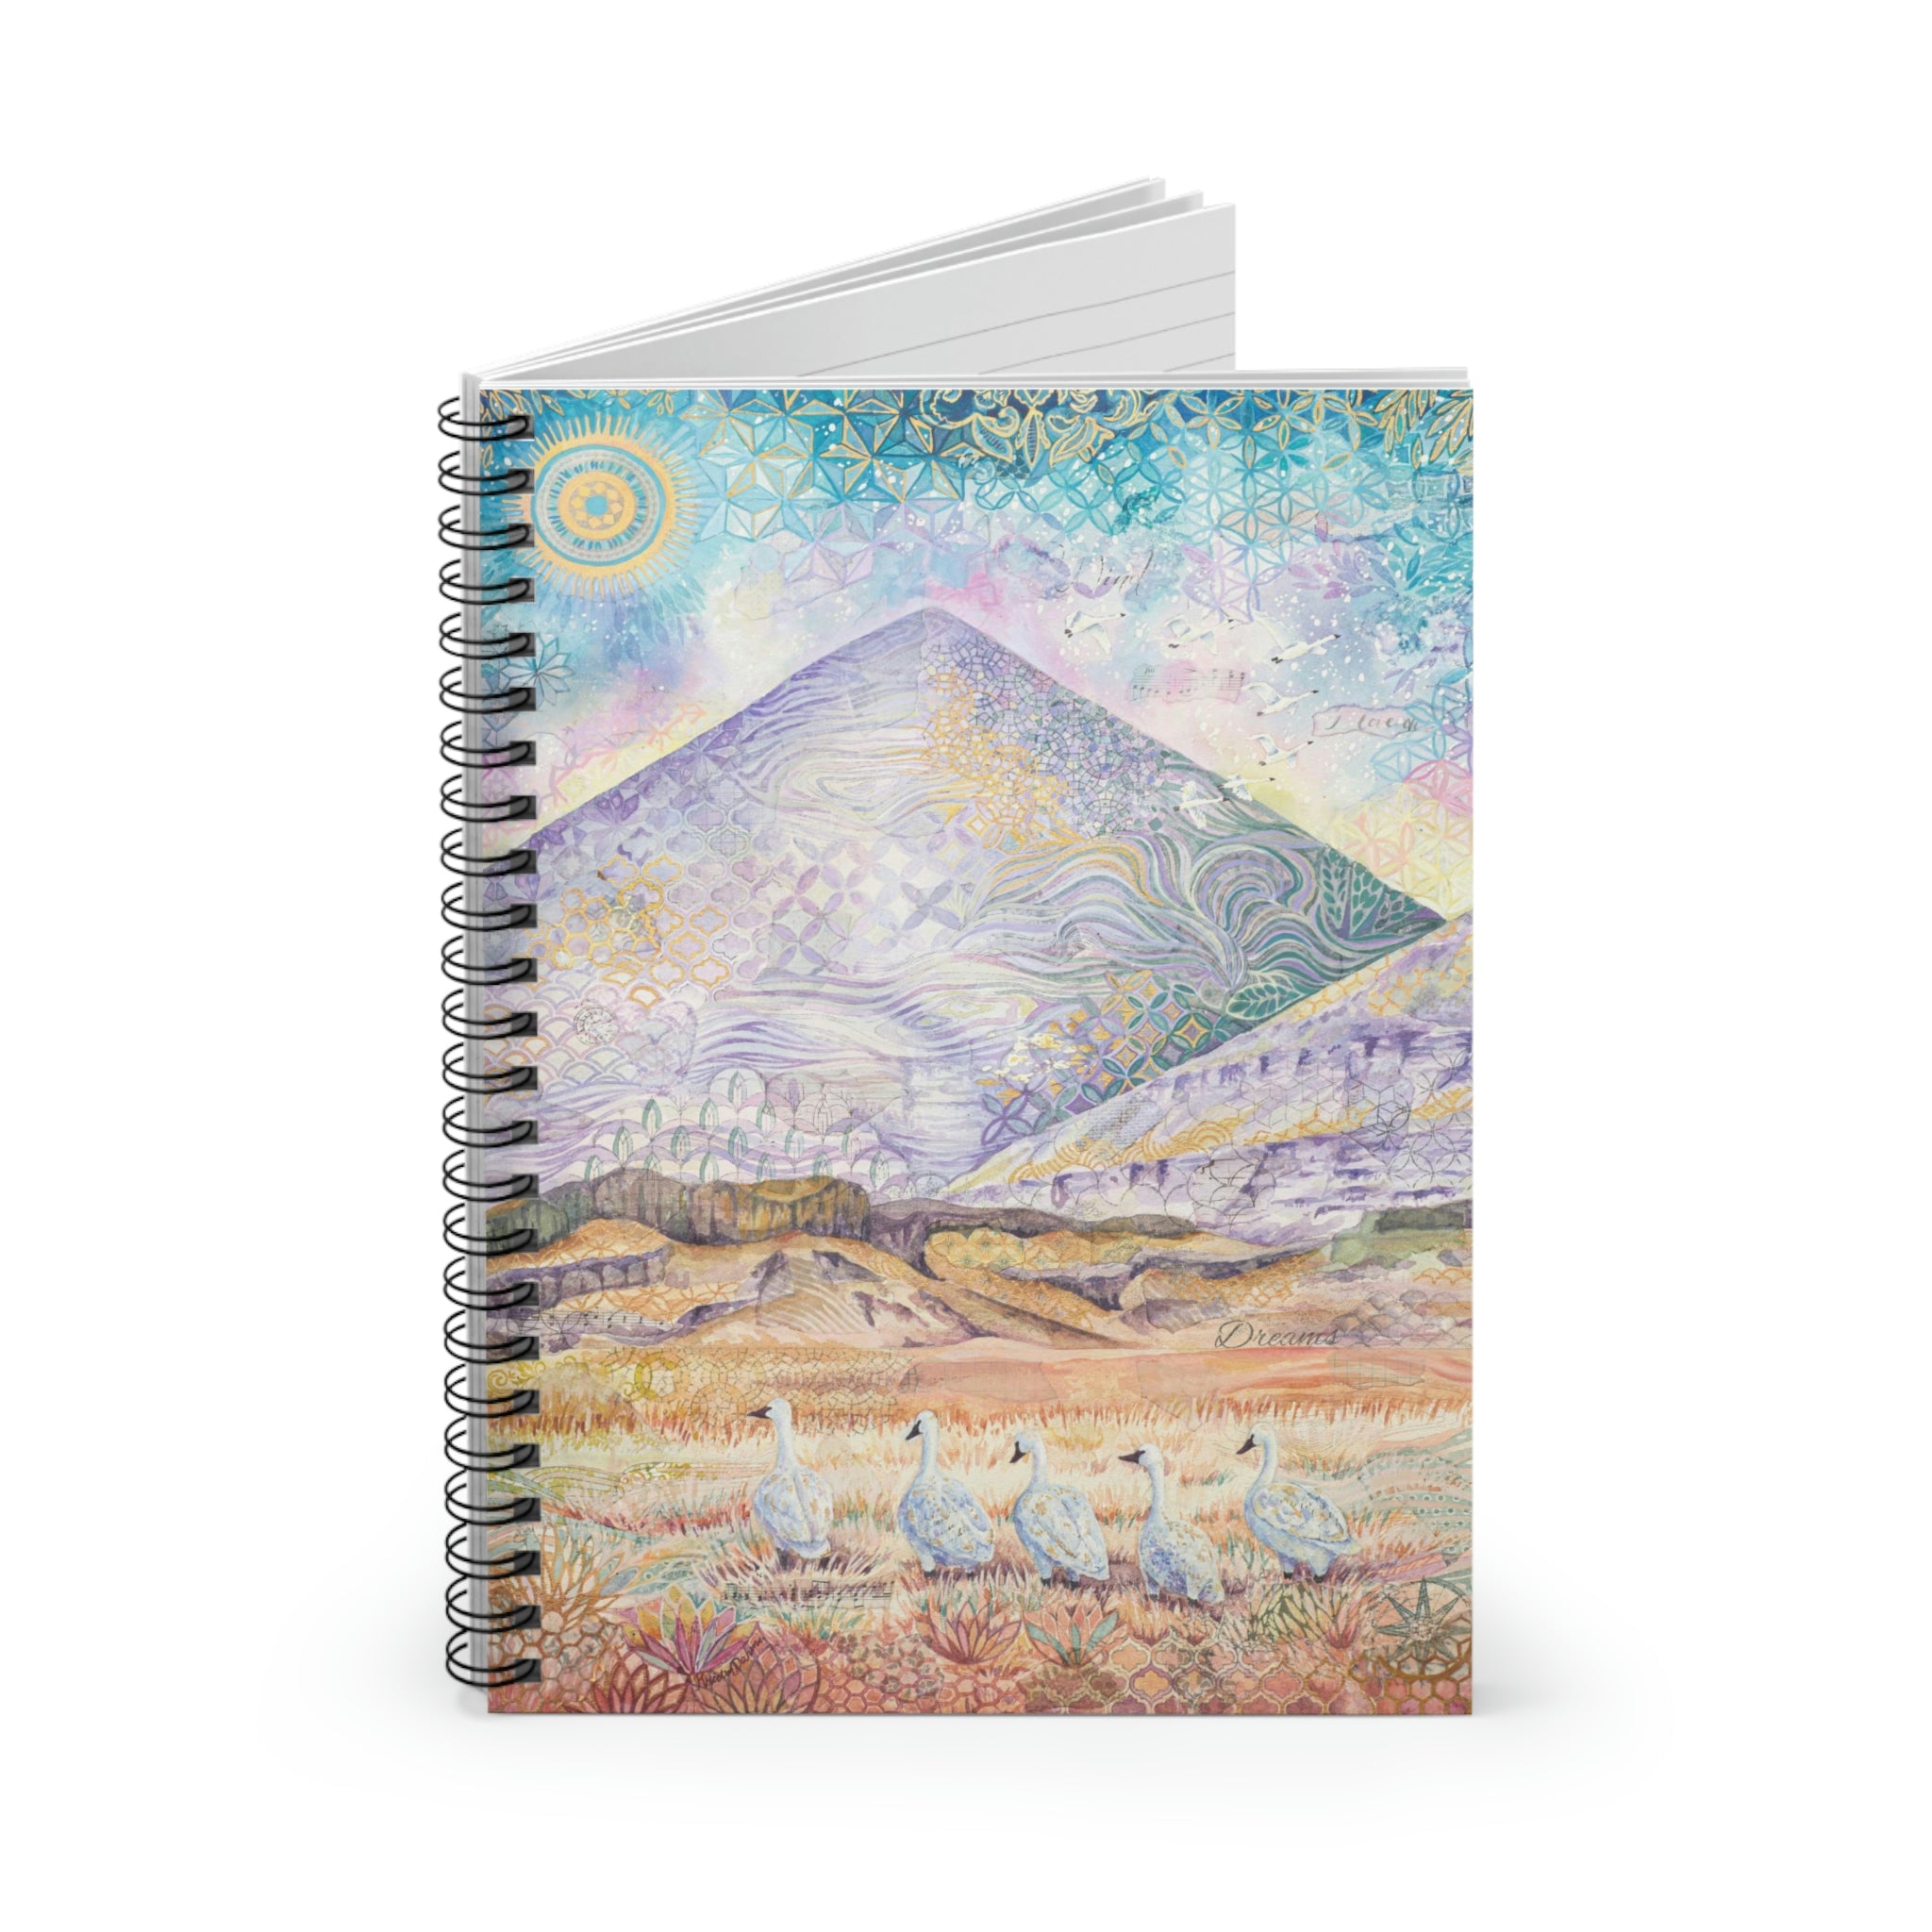 Spiral Notebook - Ruled Line One Size